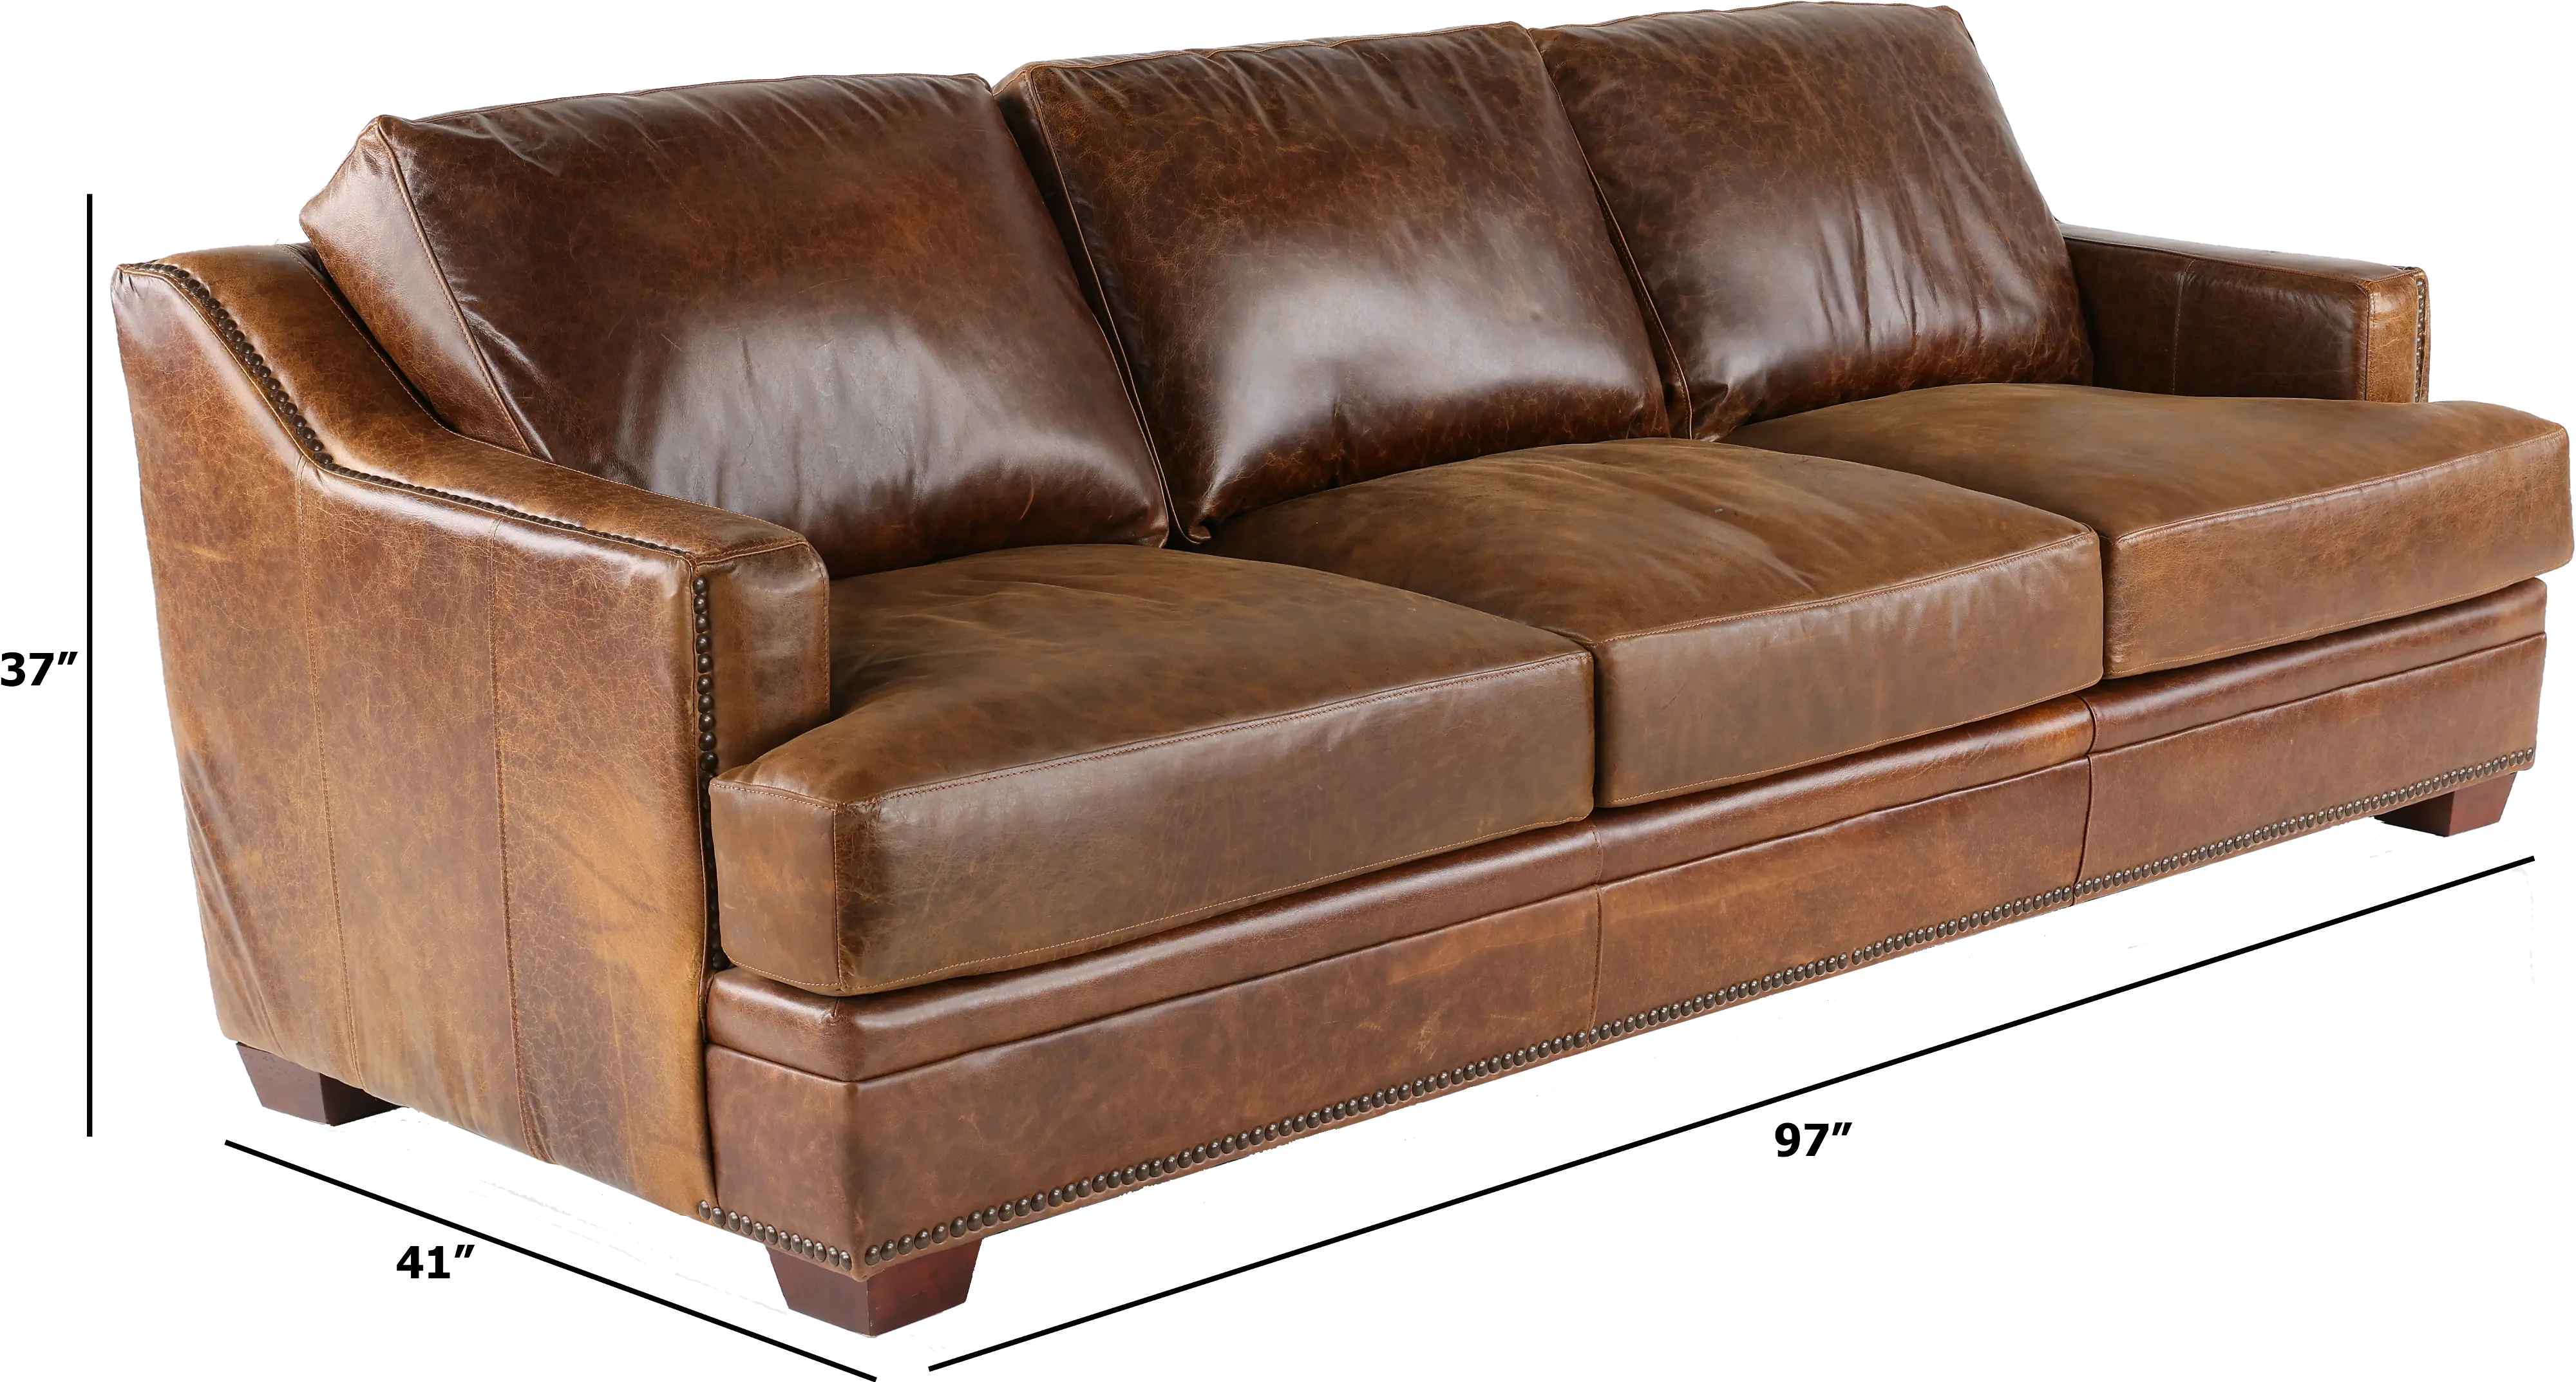 Antique Brown Leather Sofa